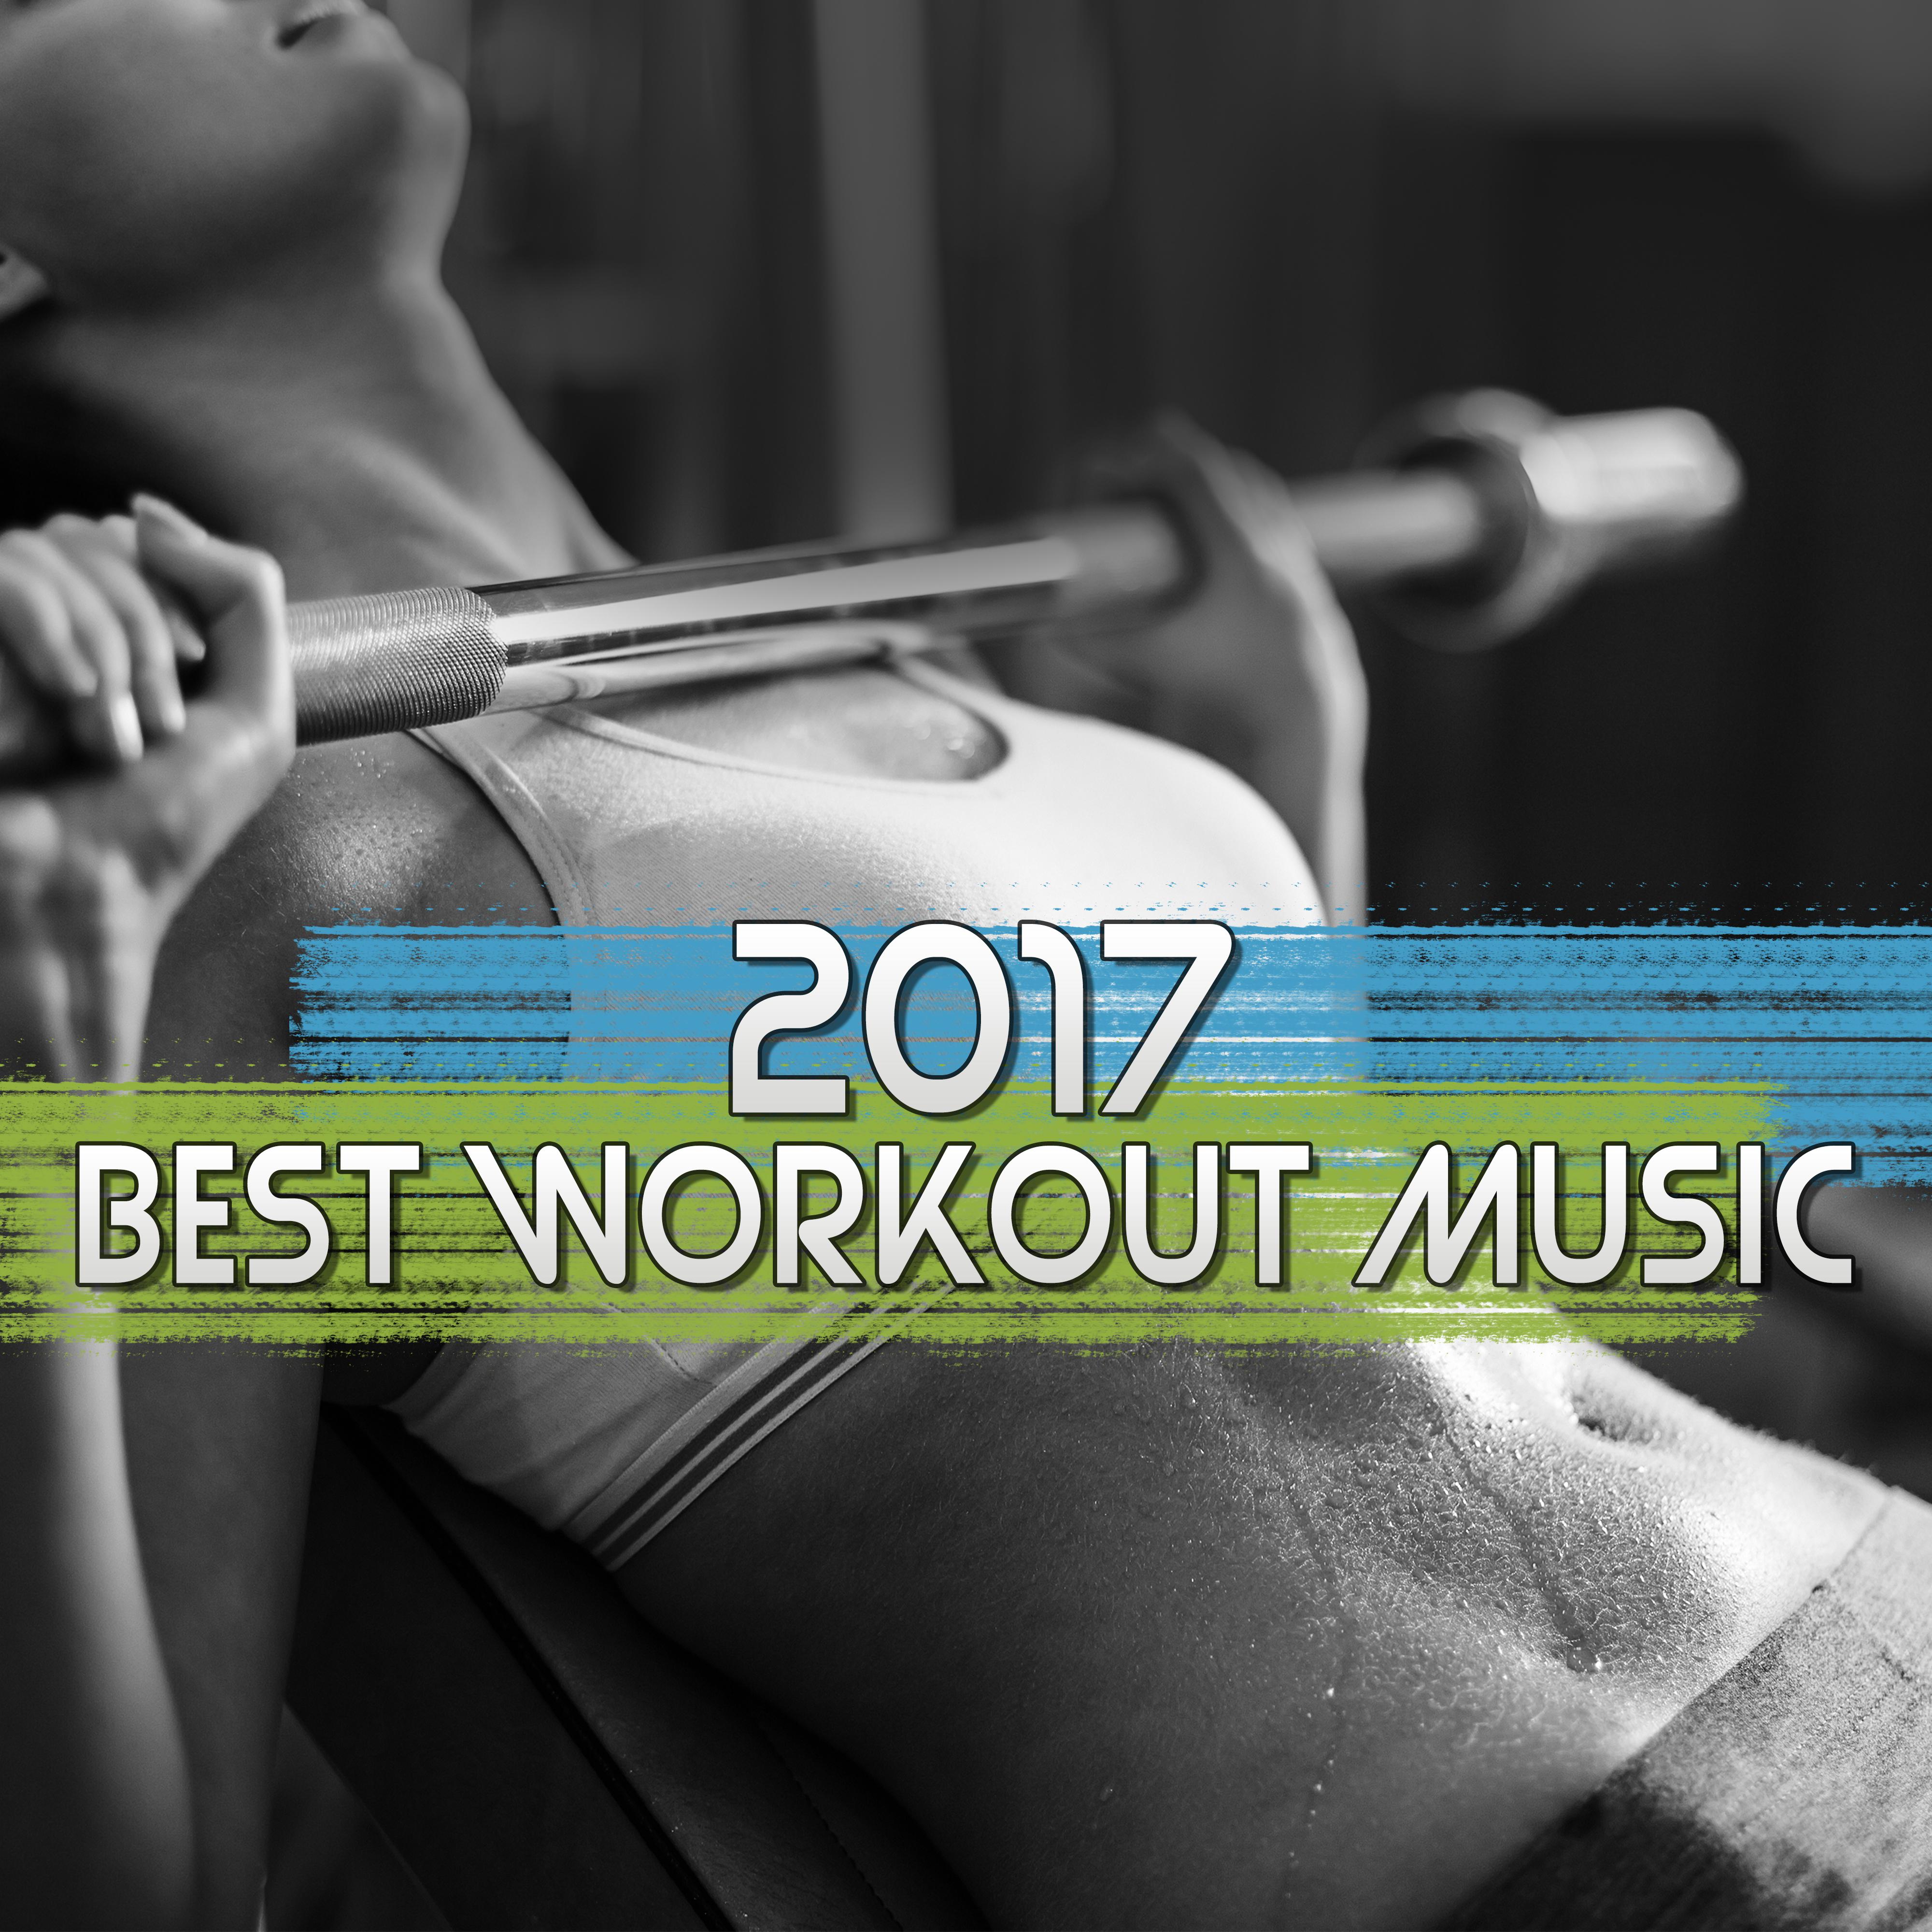 Music for Fitness